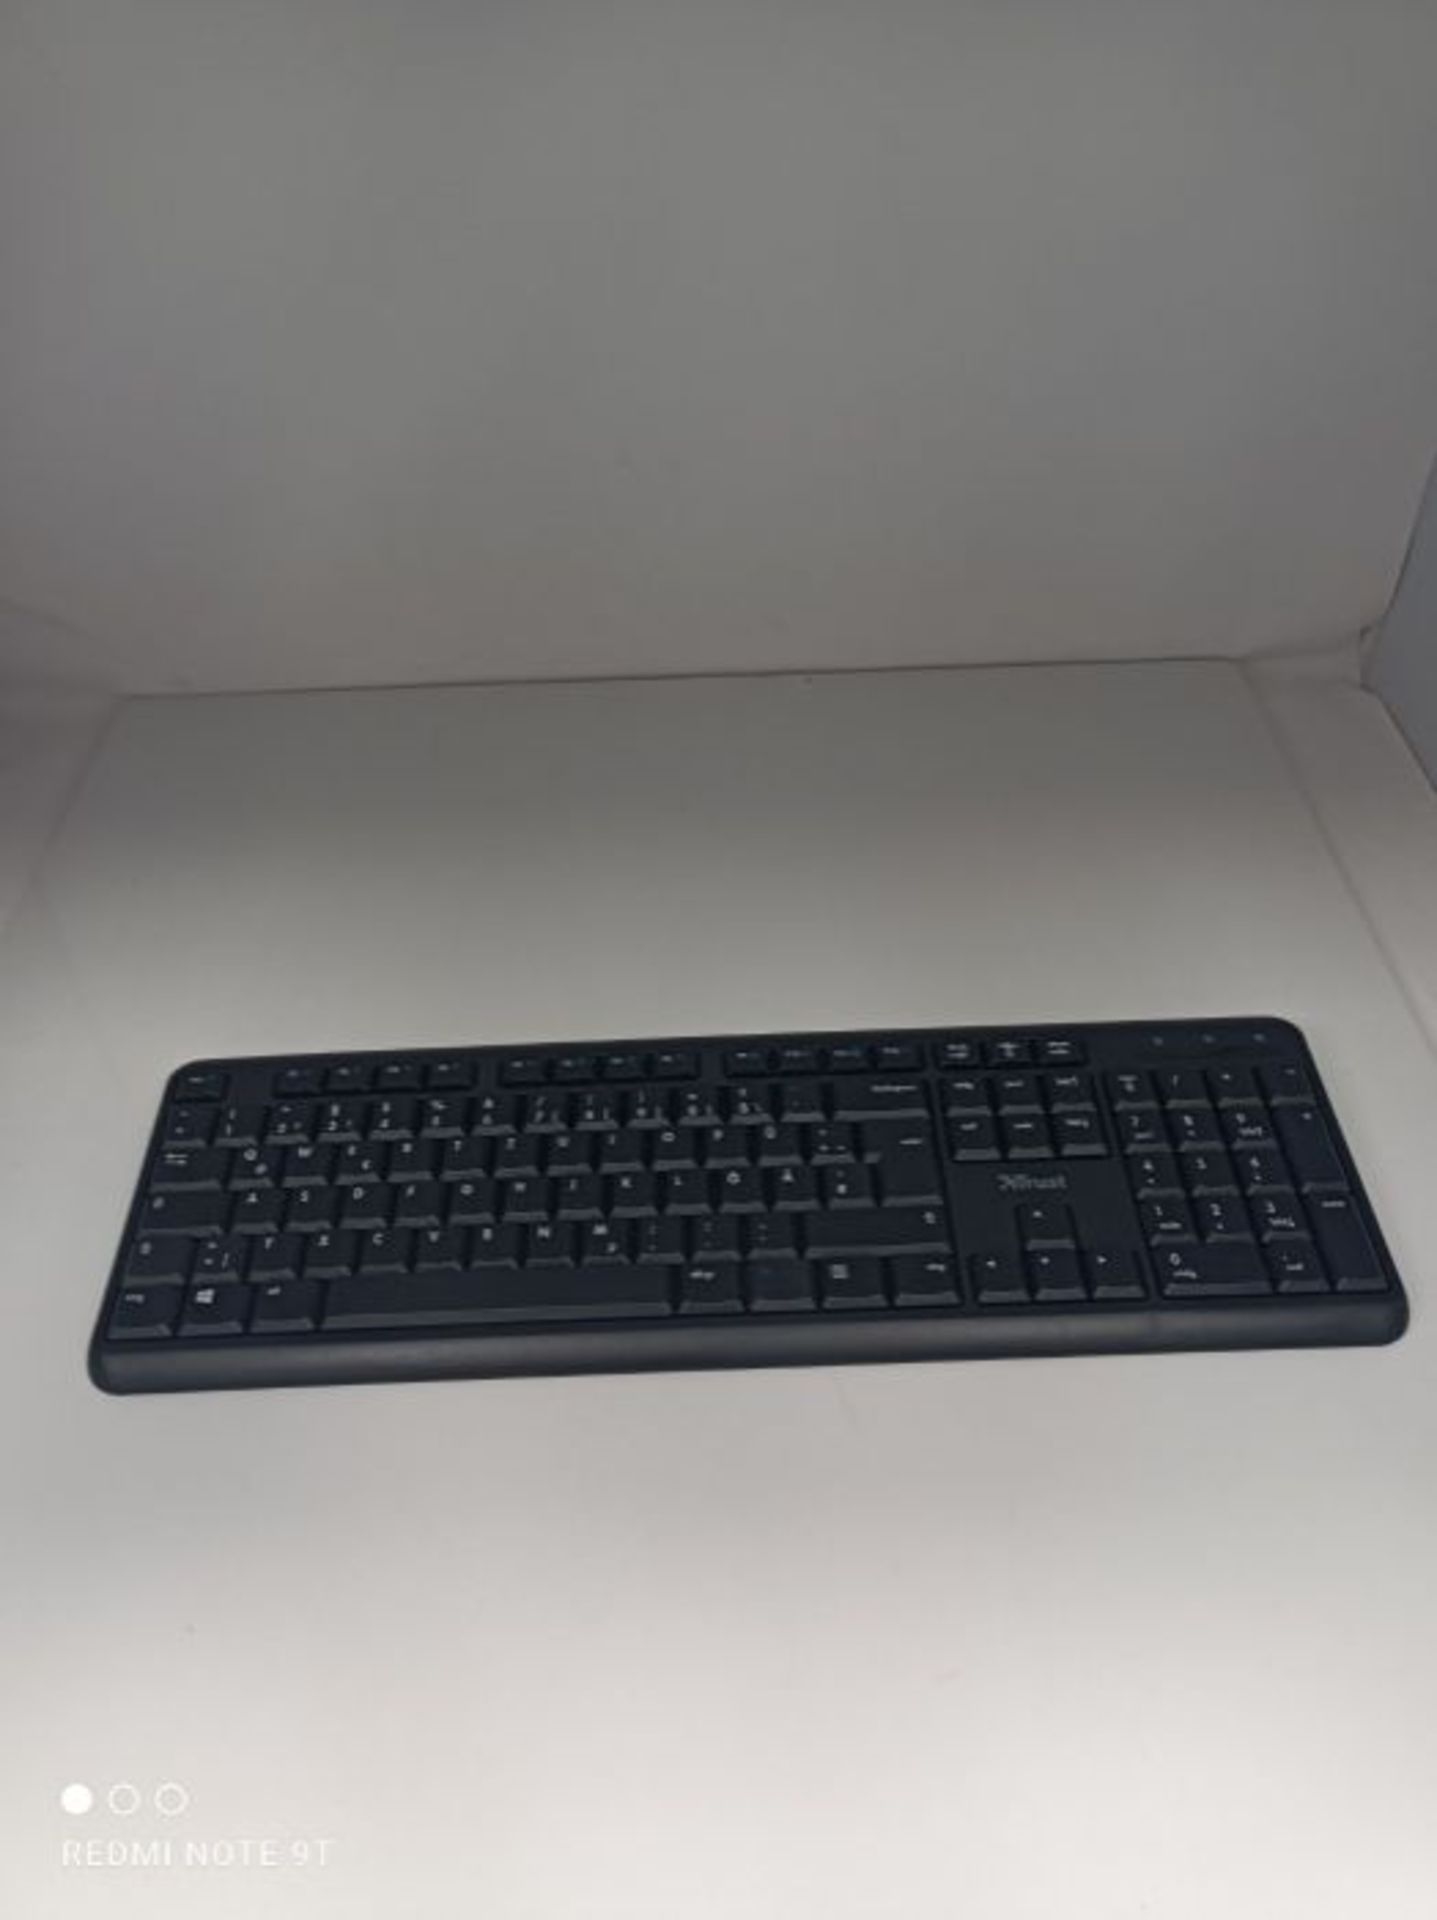 Trust 24080 Ymo Wireless Keyboard Set - German QWERTZ Layout, Quiet Keys and Mouse But